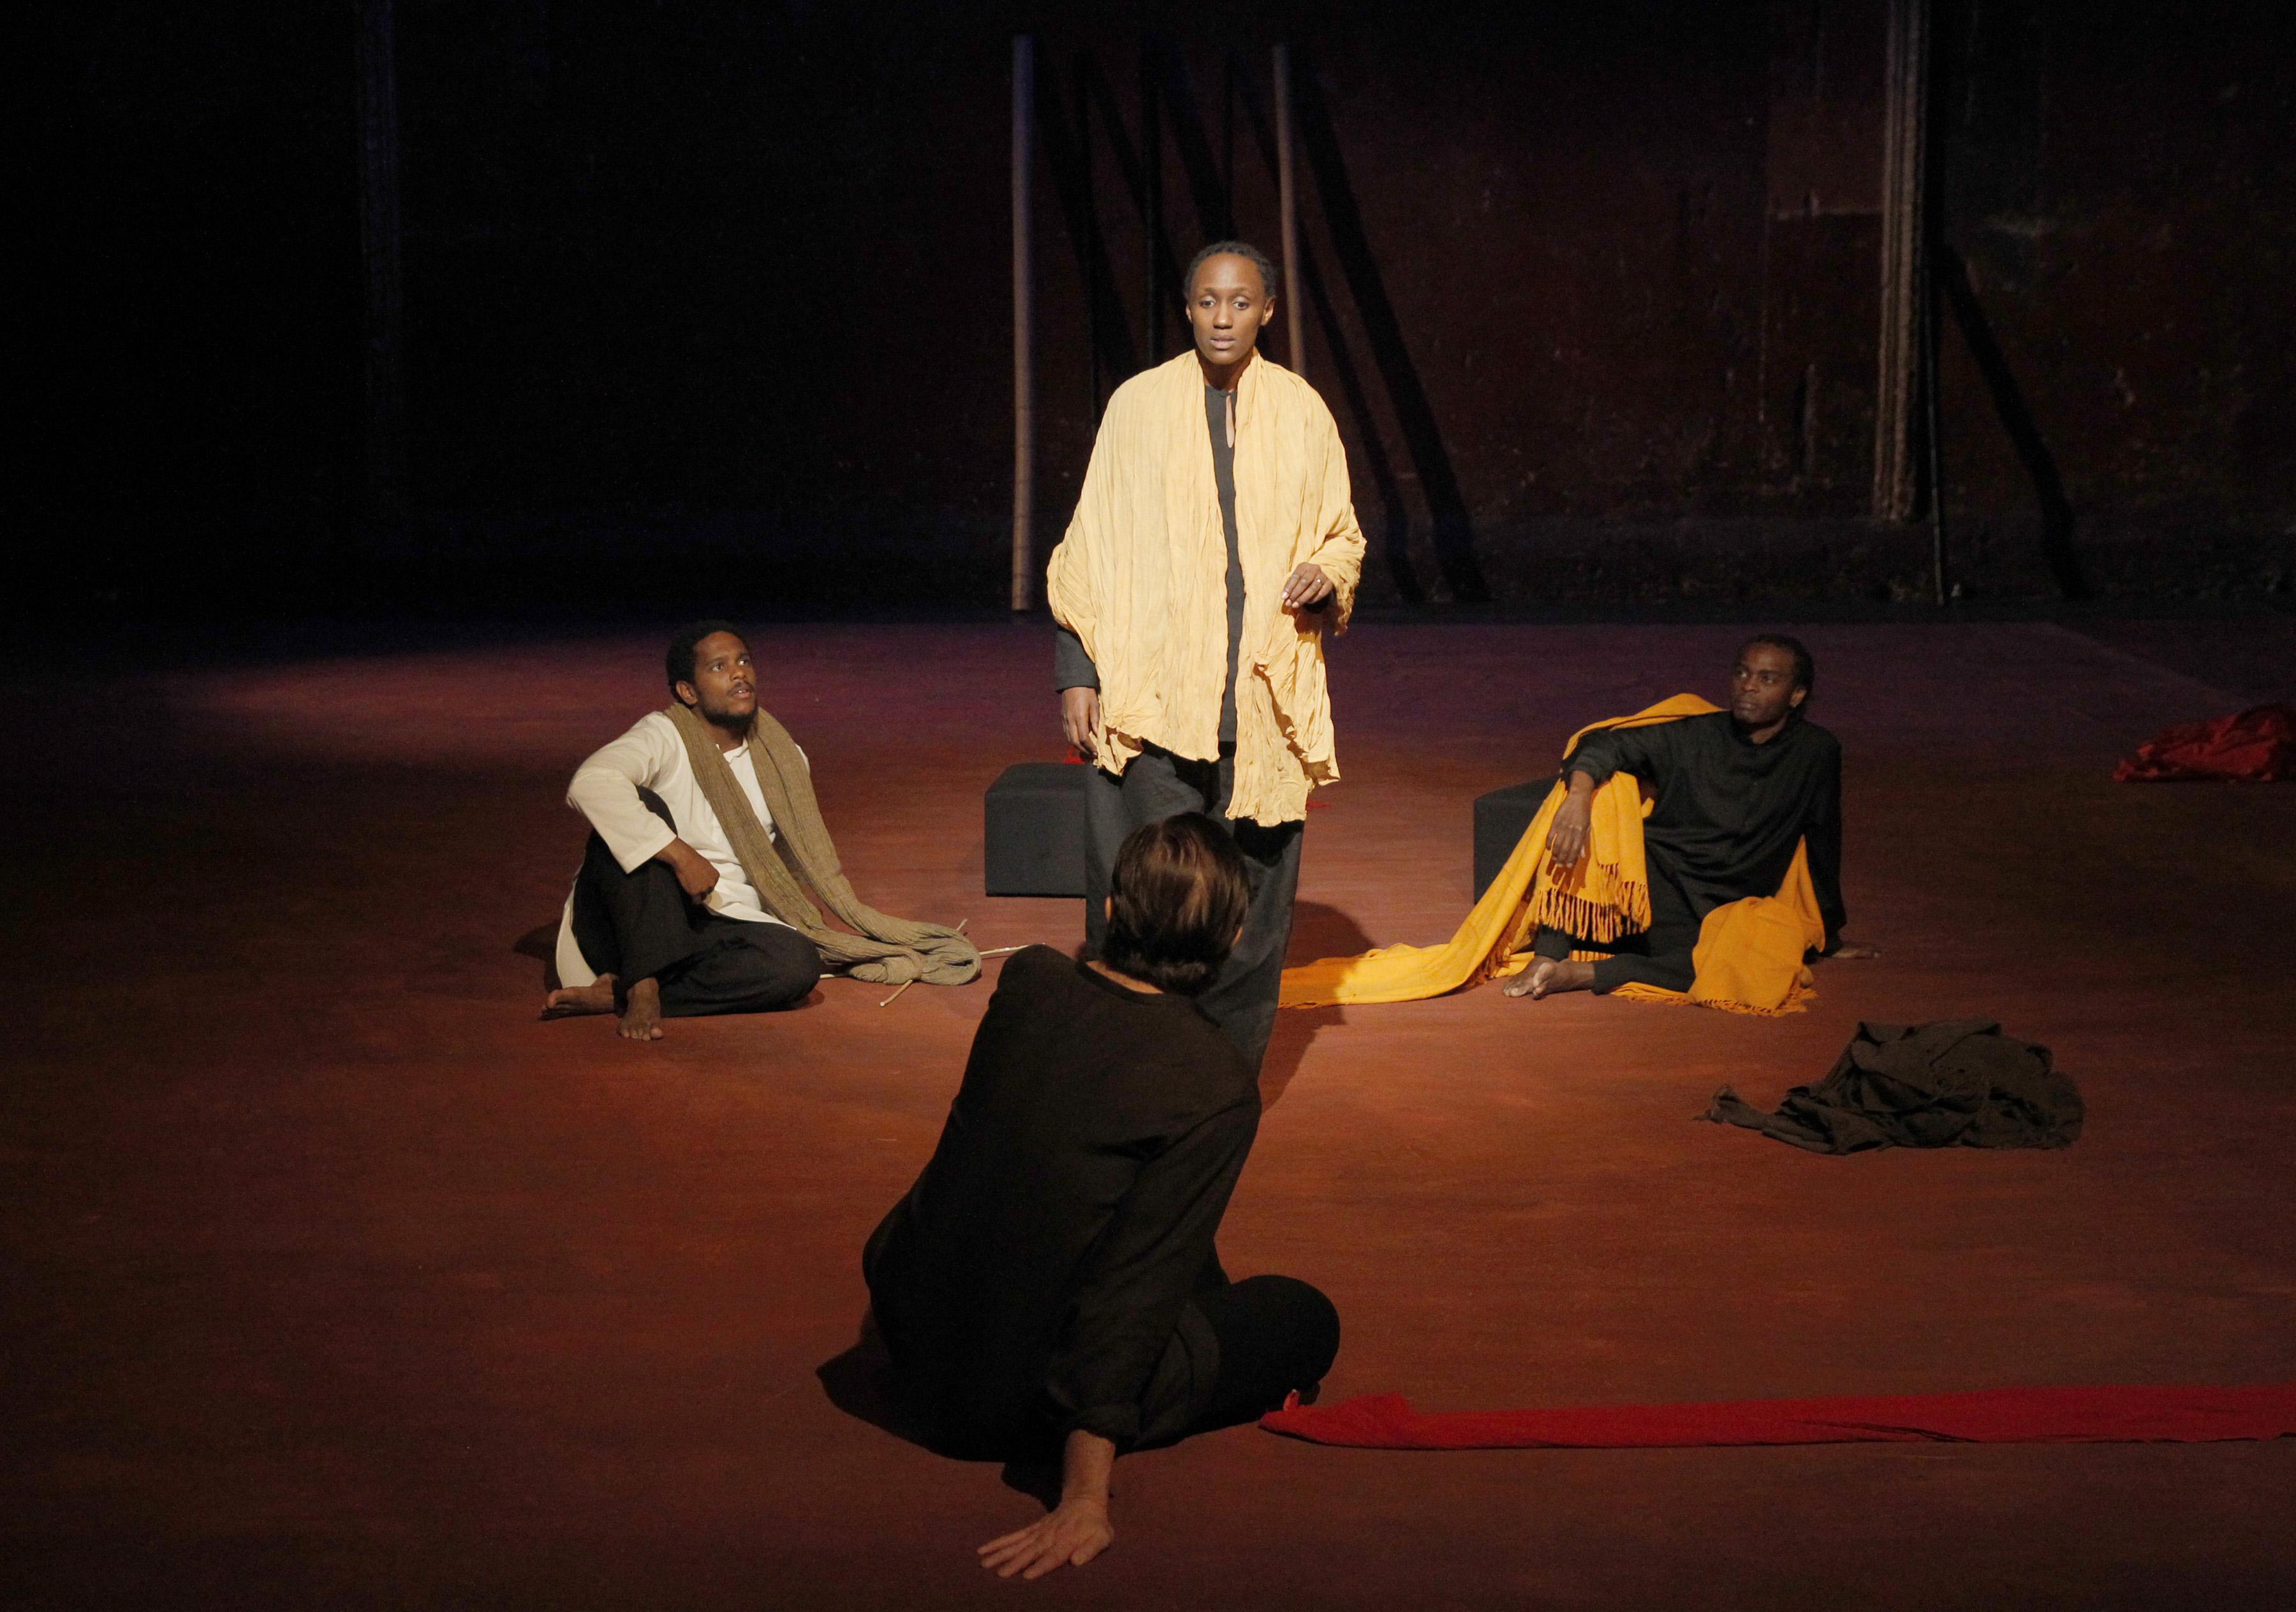 A woman stands in the center of a stage speaking to three people, who sit in a triangle around her, wearing or holding long colored scarves in different colors.